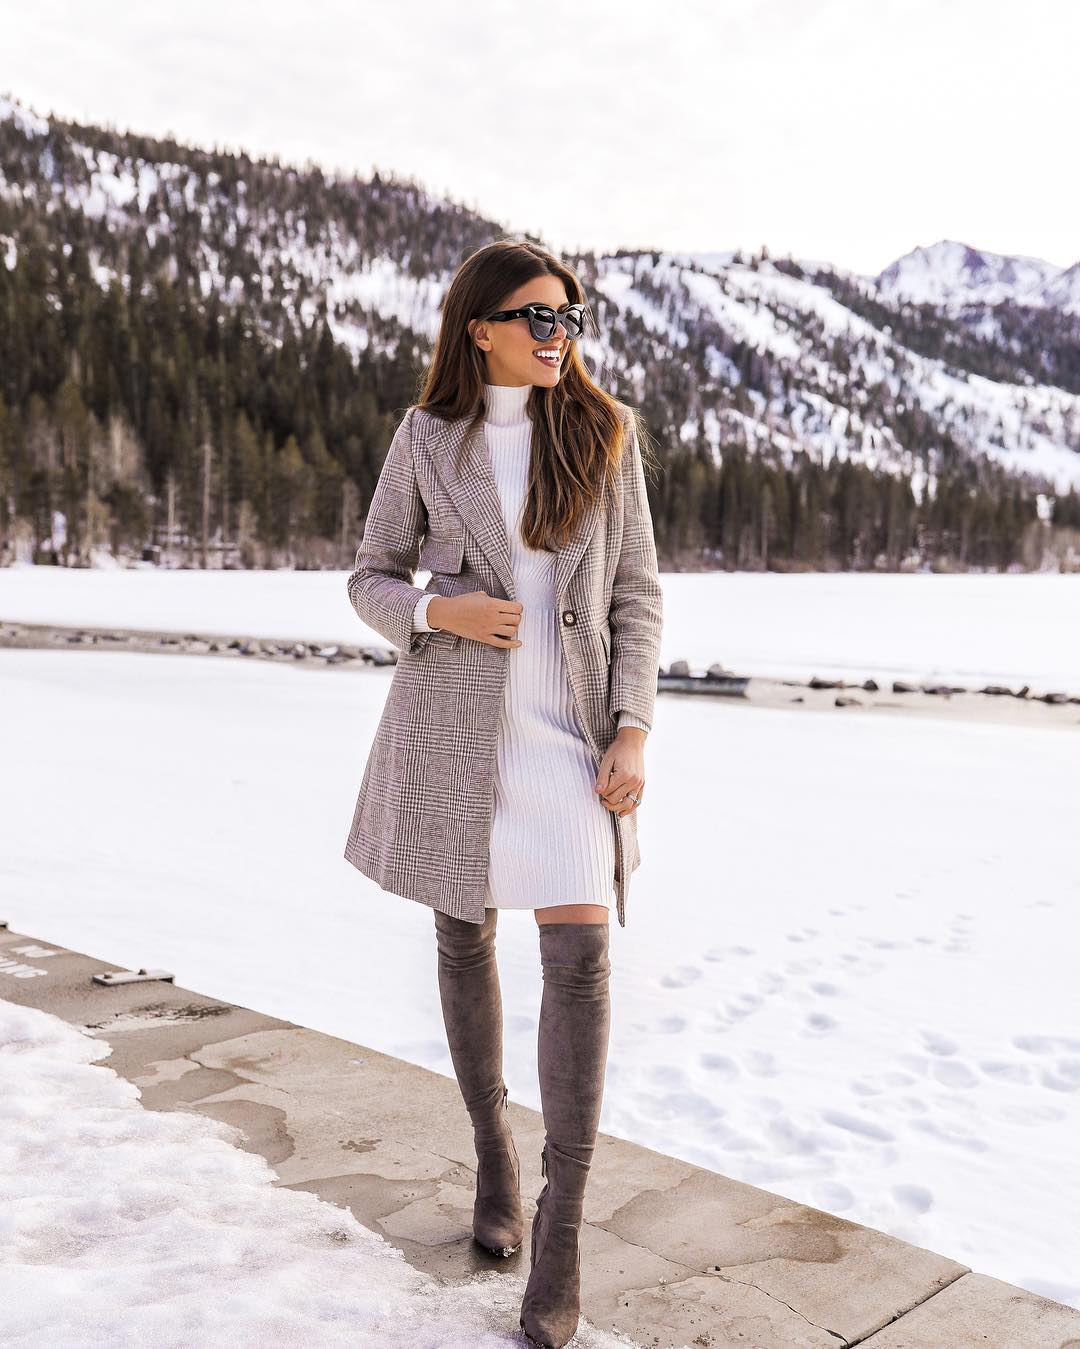 Checkered structured coat with white turtleneck dress and OTK boots for winter 2021